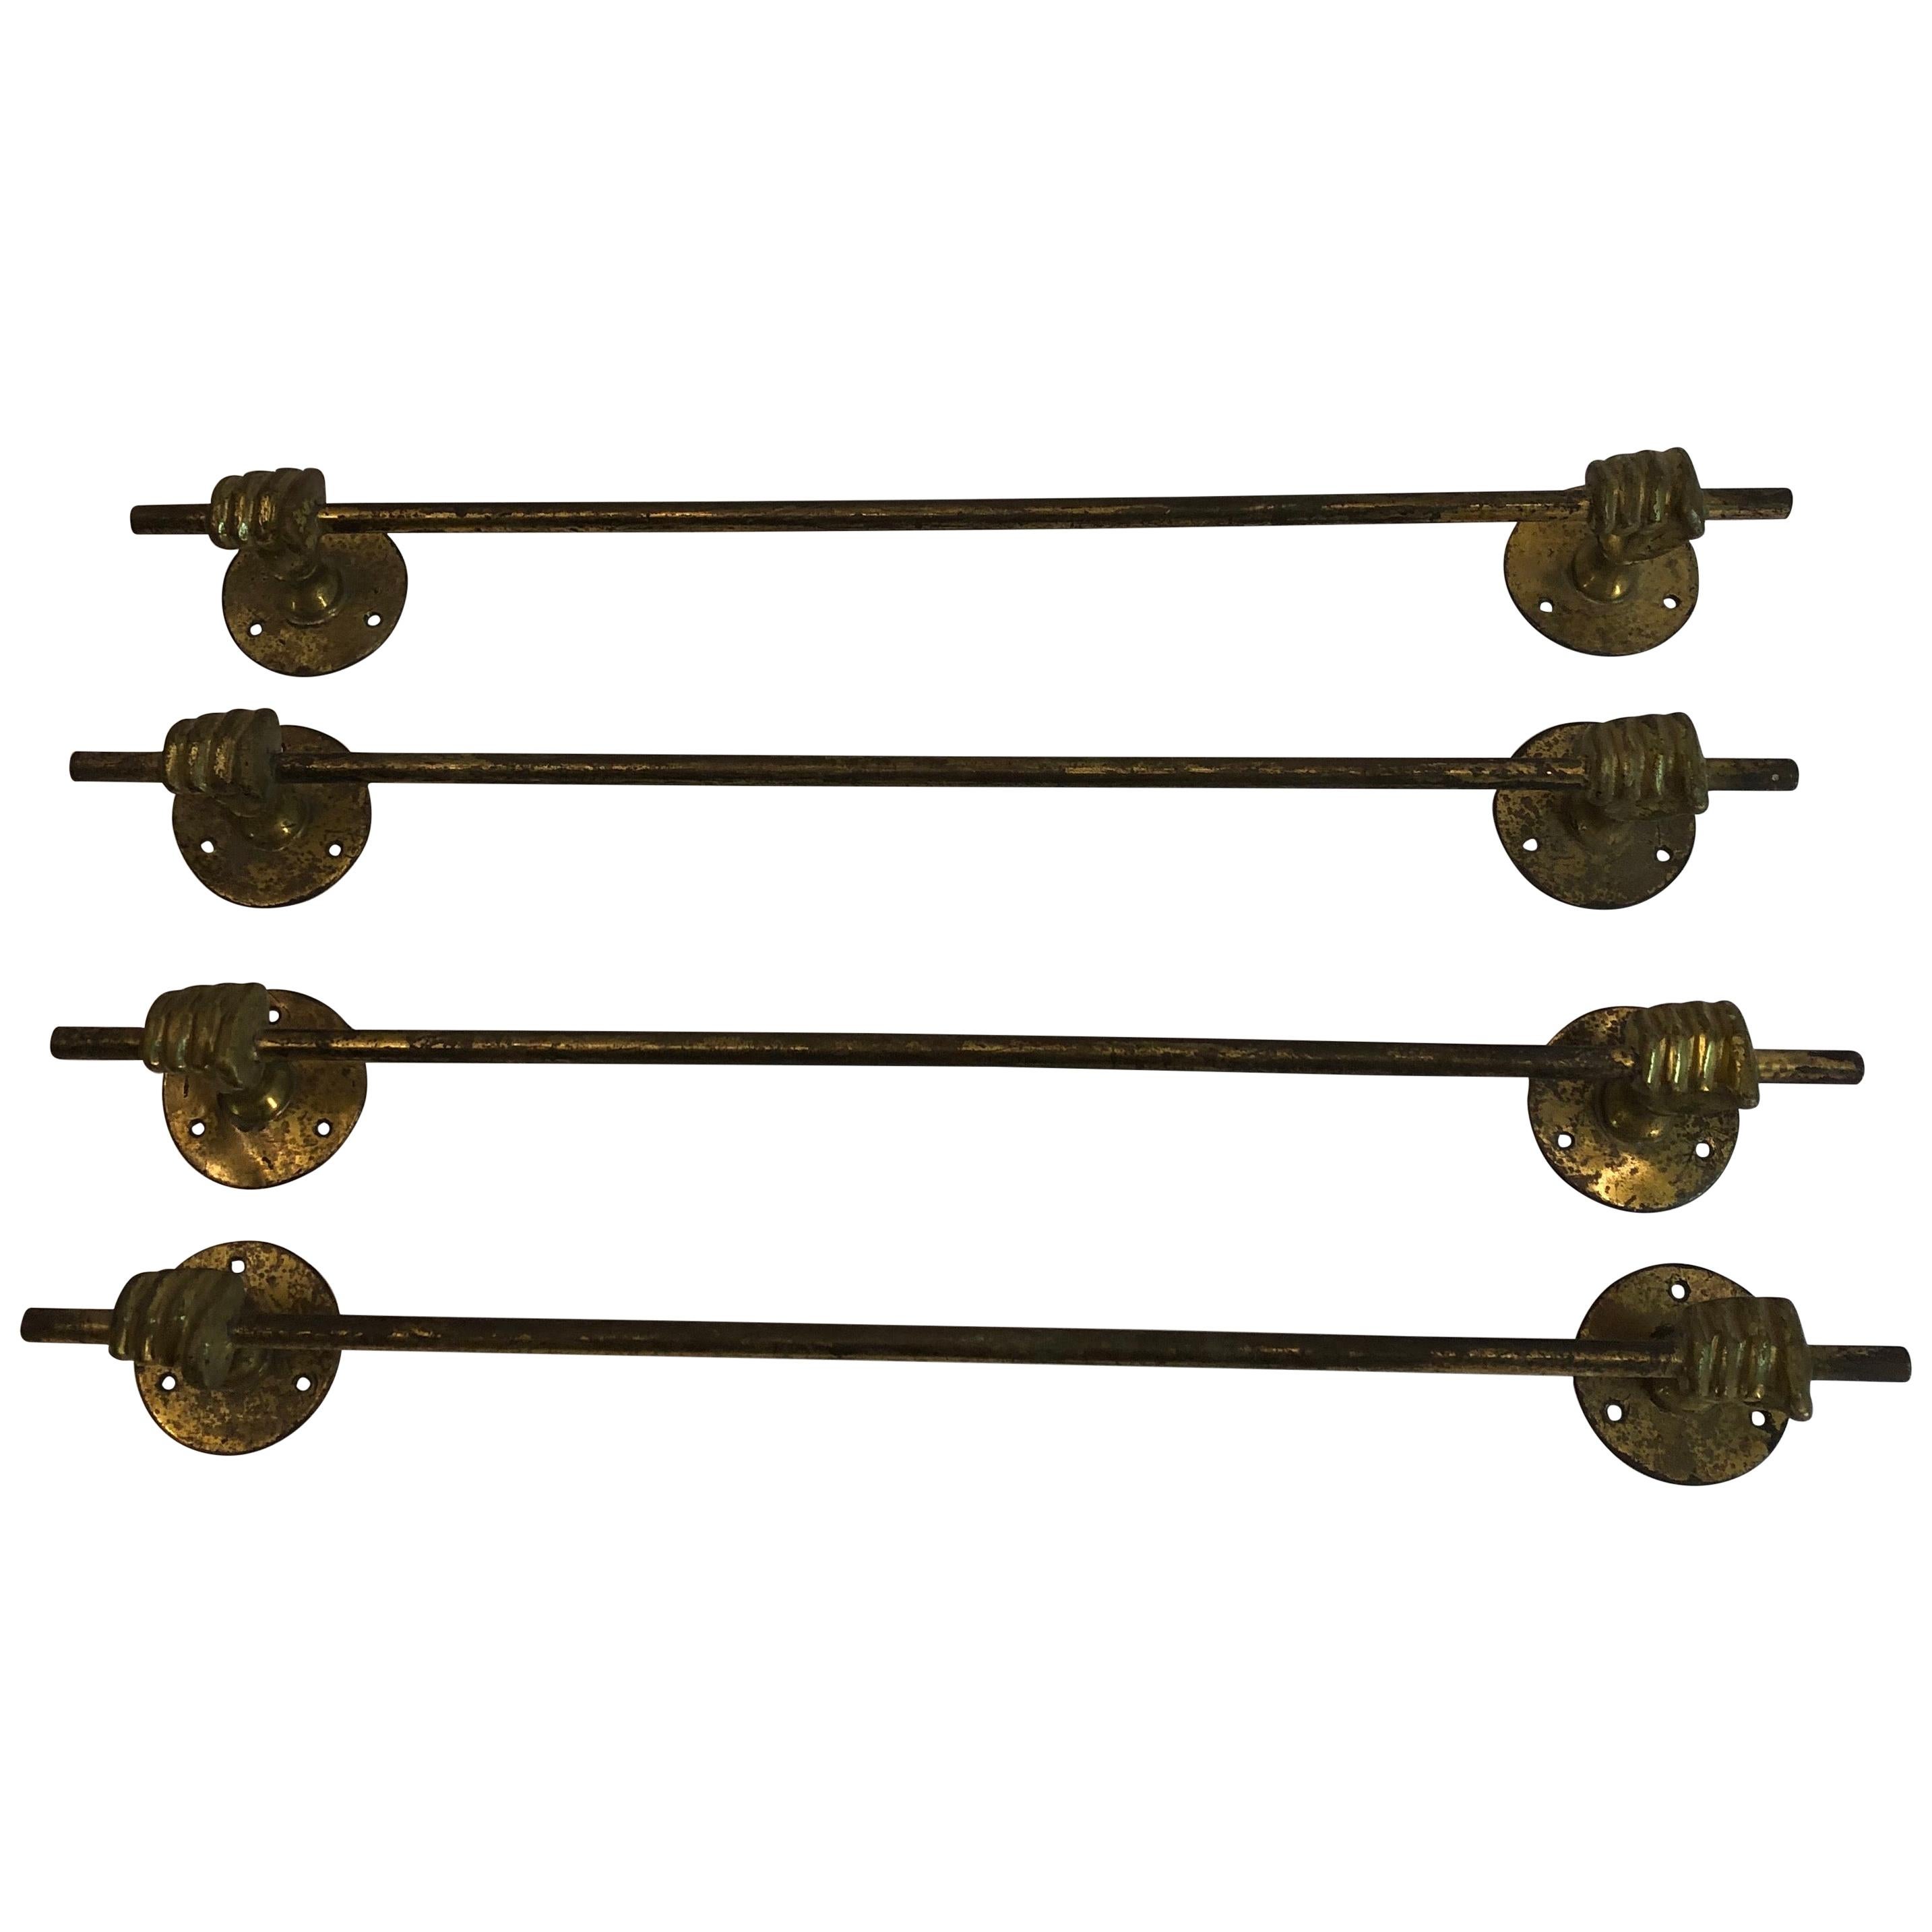 Vintage Metal/Brass Hands/Fists Holding a Towel Rail